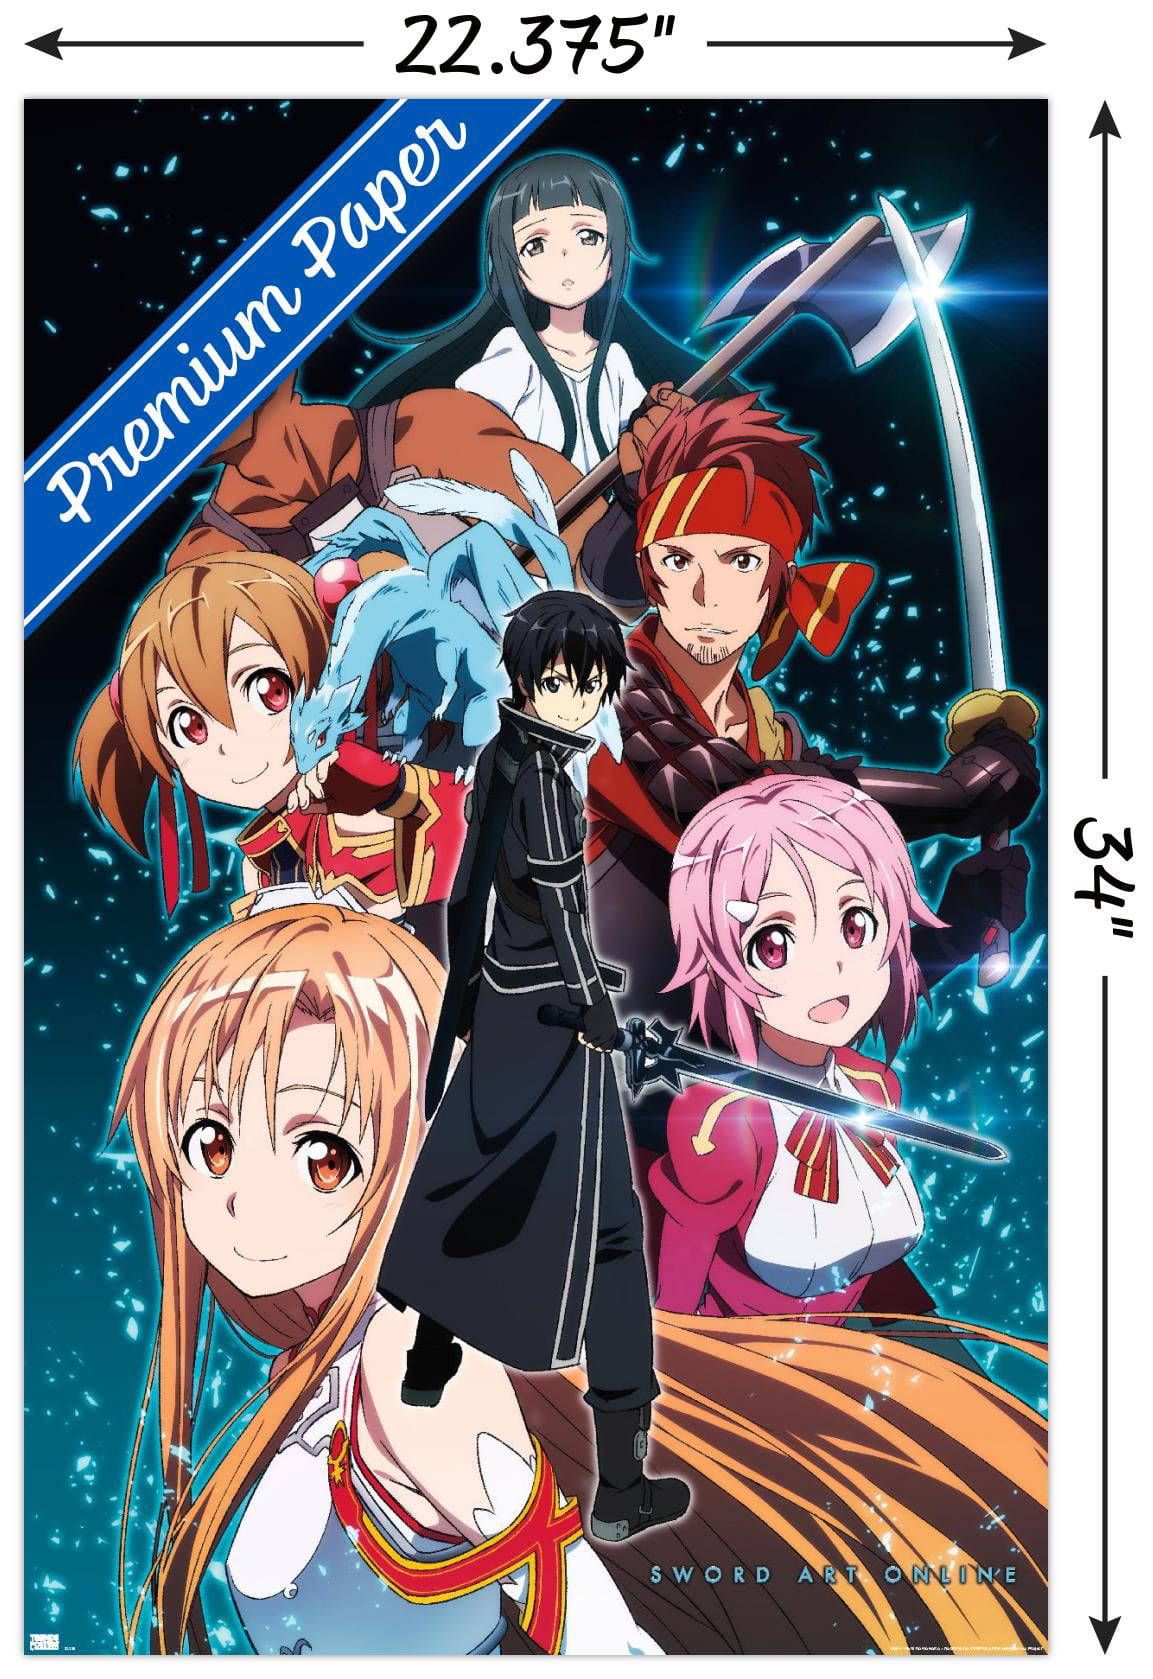 Sword Art Online Anime Fabric Wall Scroll Poster (16 x 23)  Inches.[WP]-Sword-50